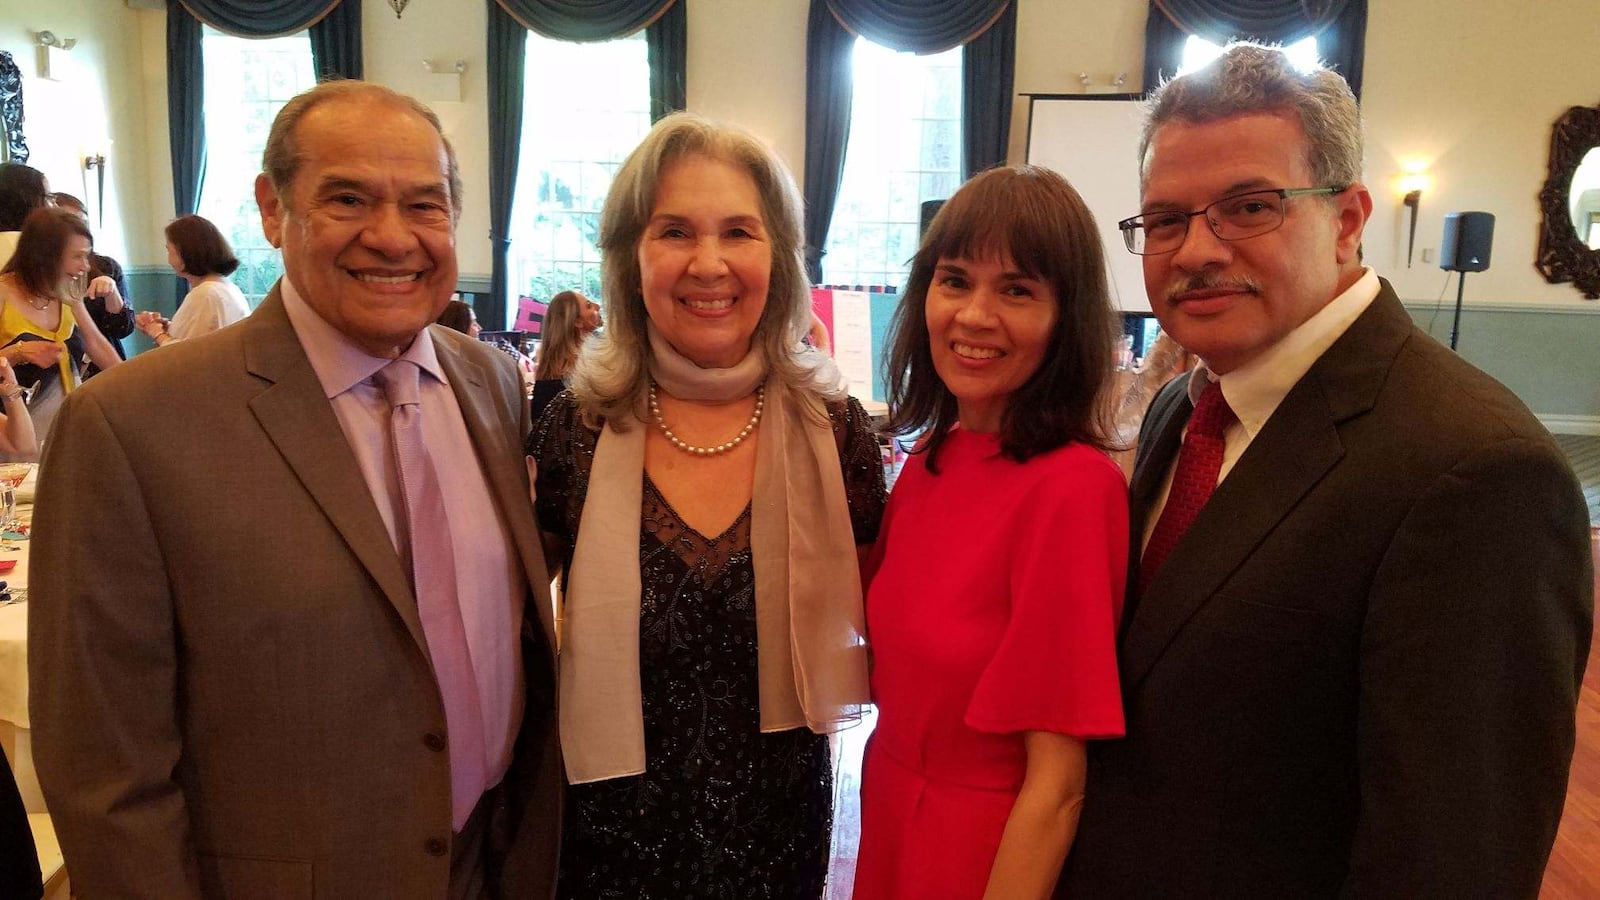 Elizabeth Mendoza, second from left, with family members at her retirement party.